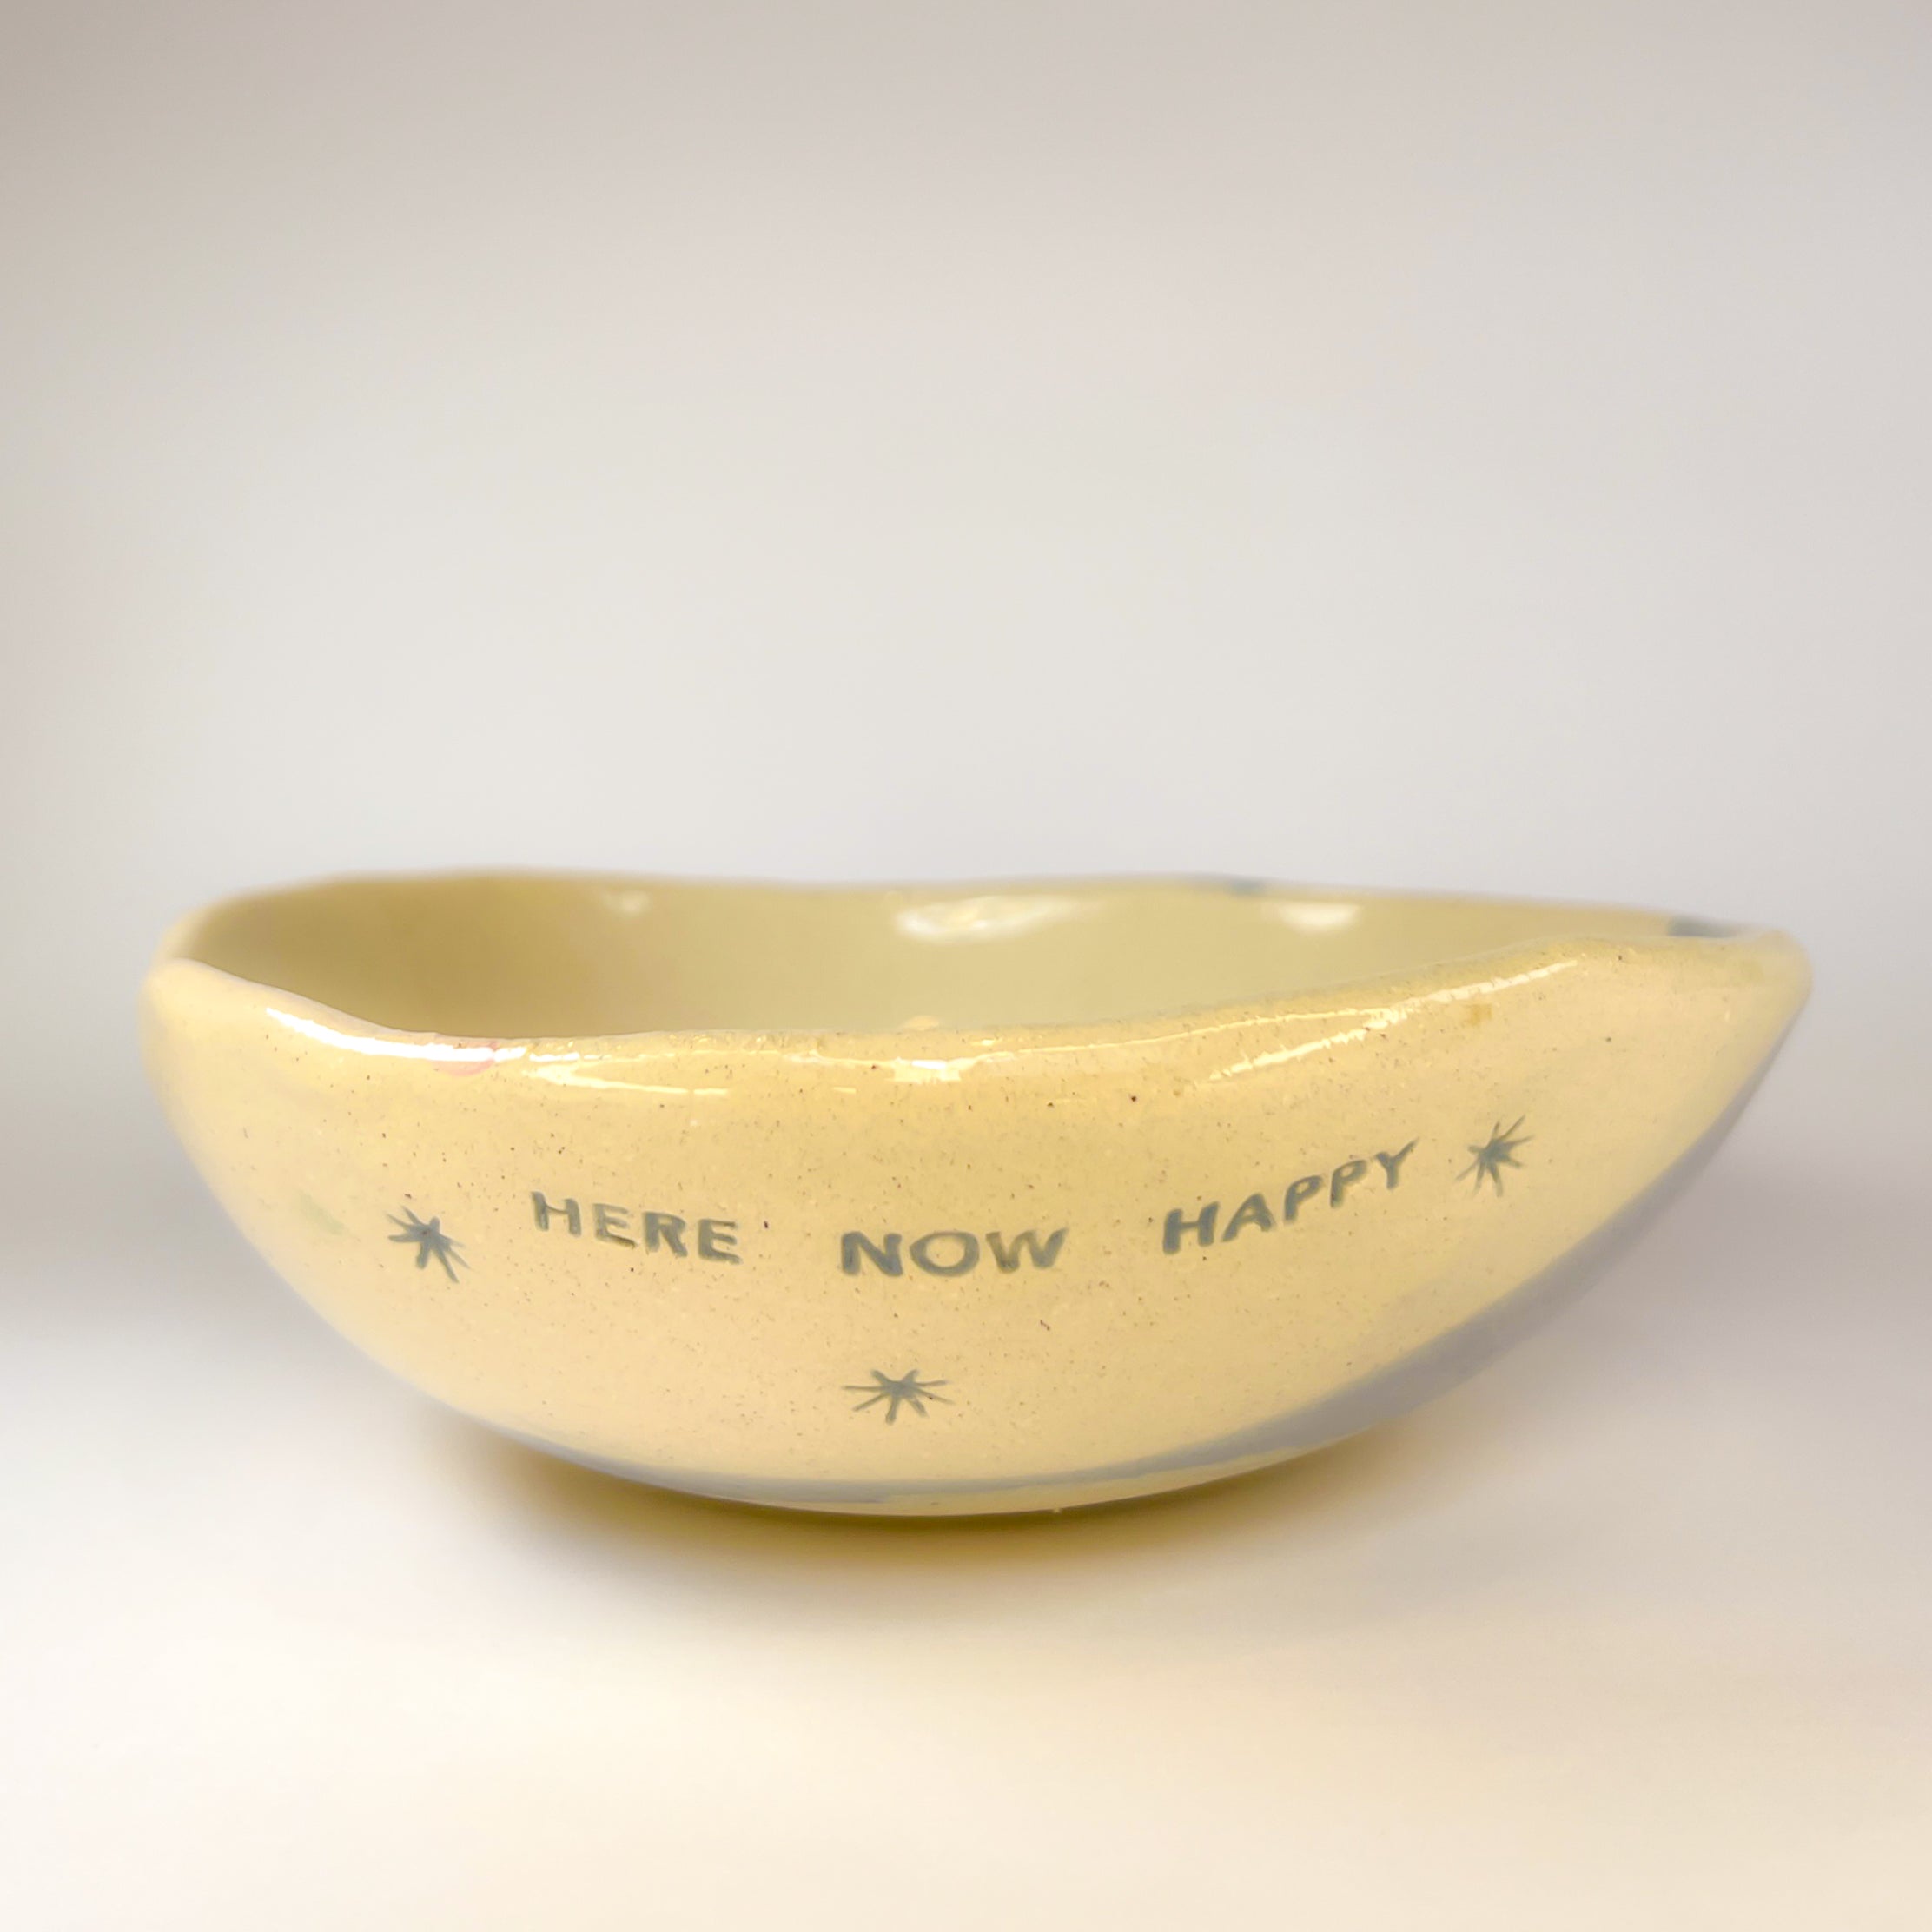 Bowl Mediano - Here Now Happy